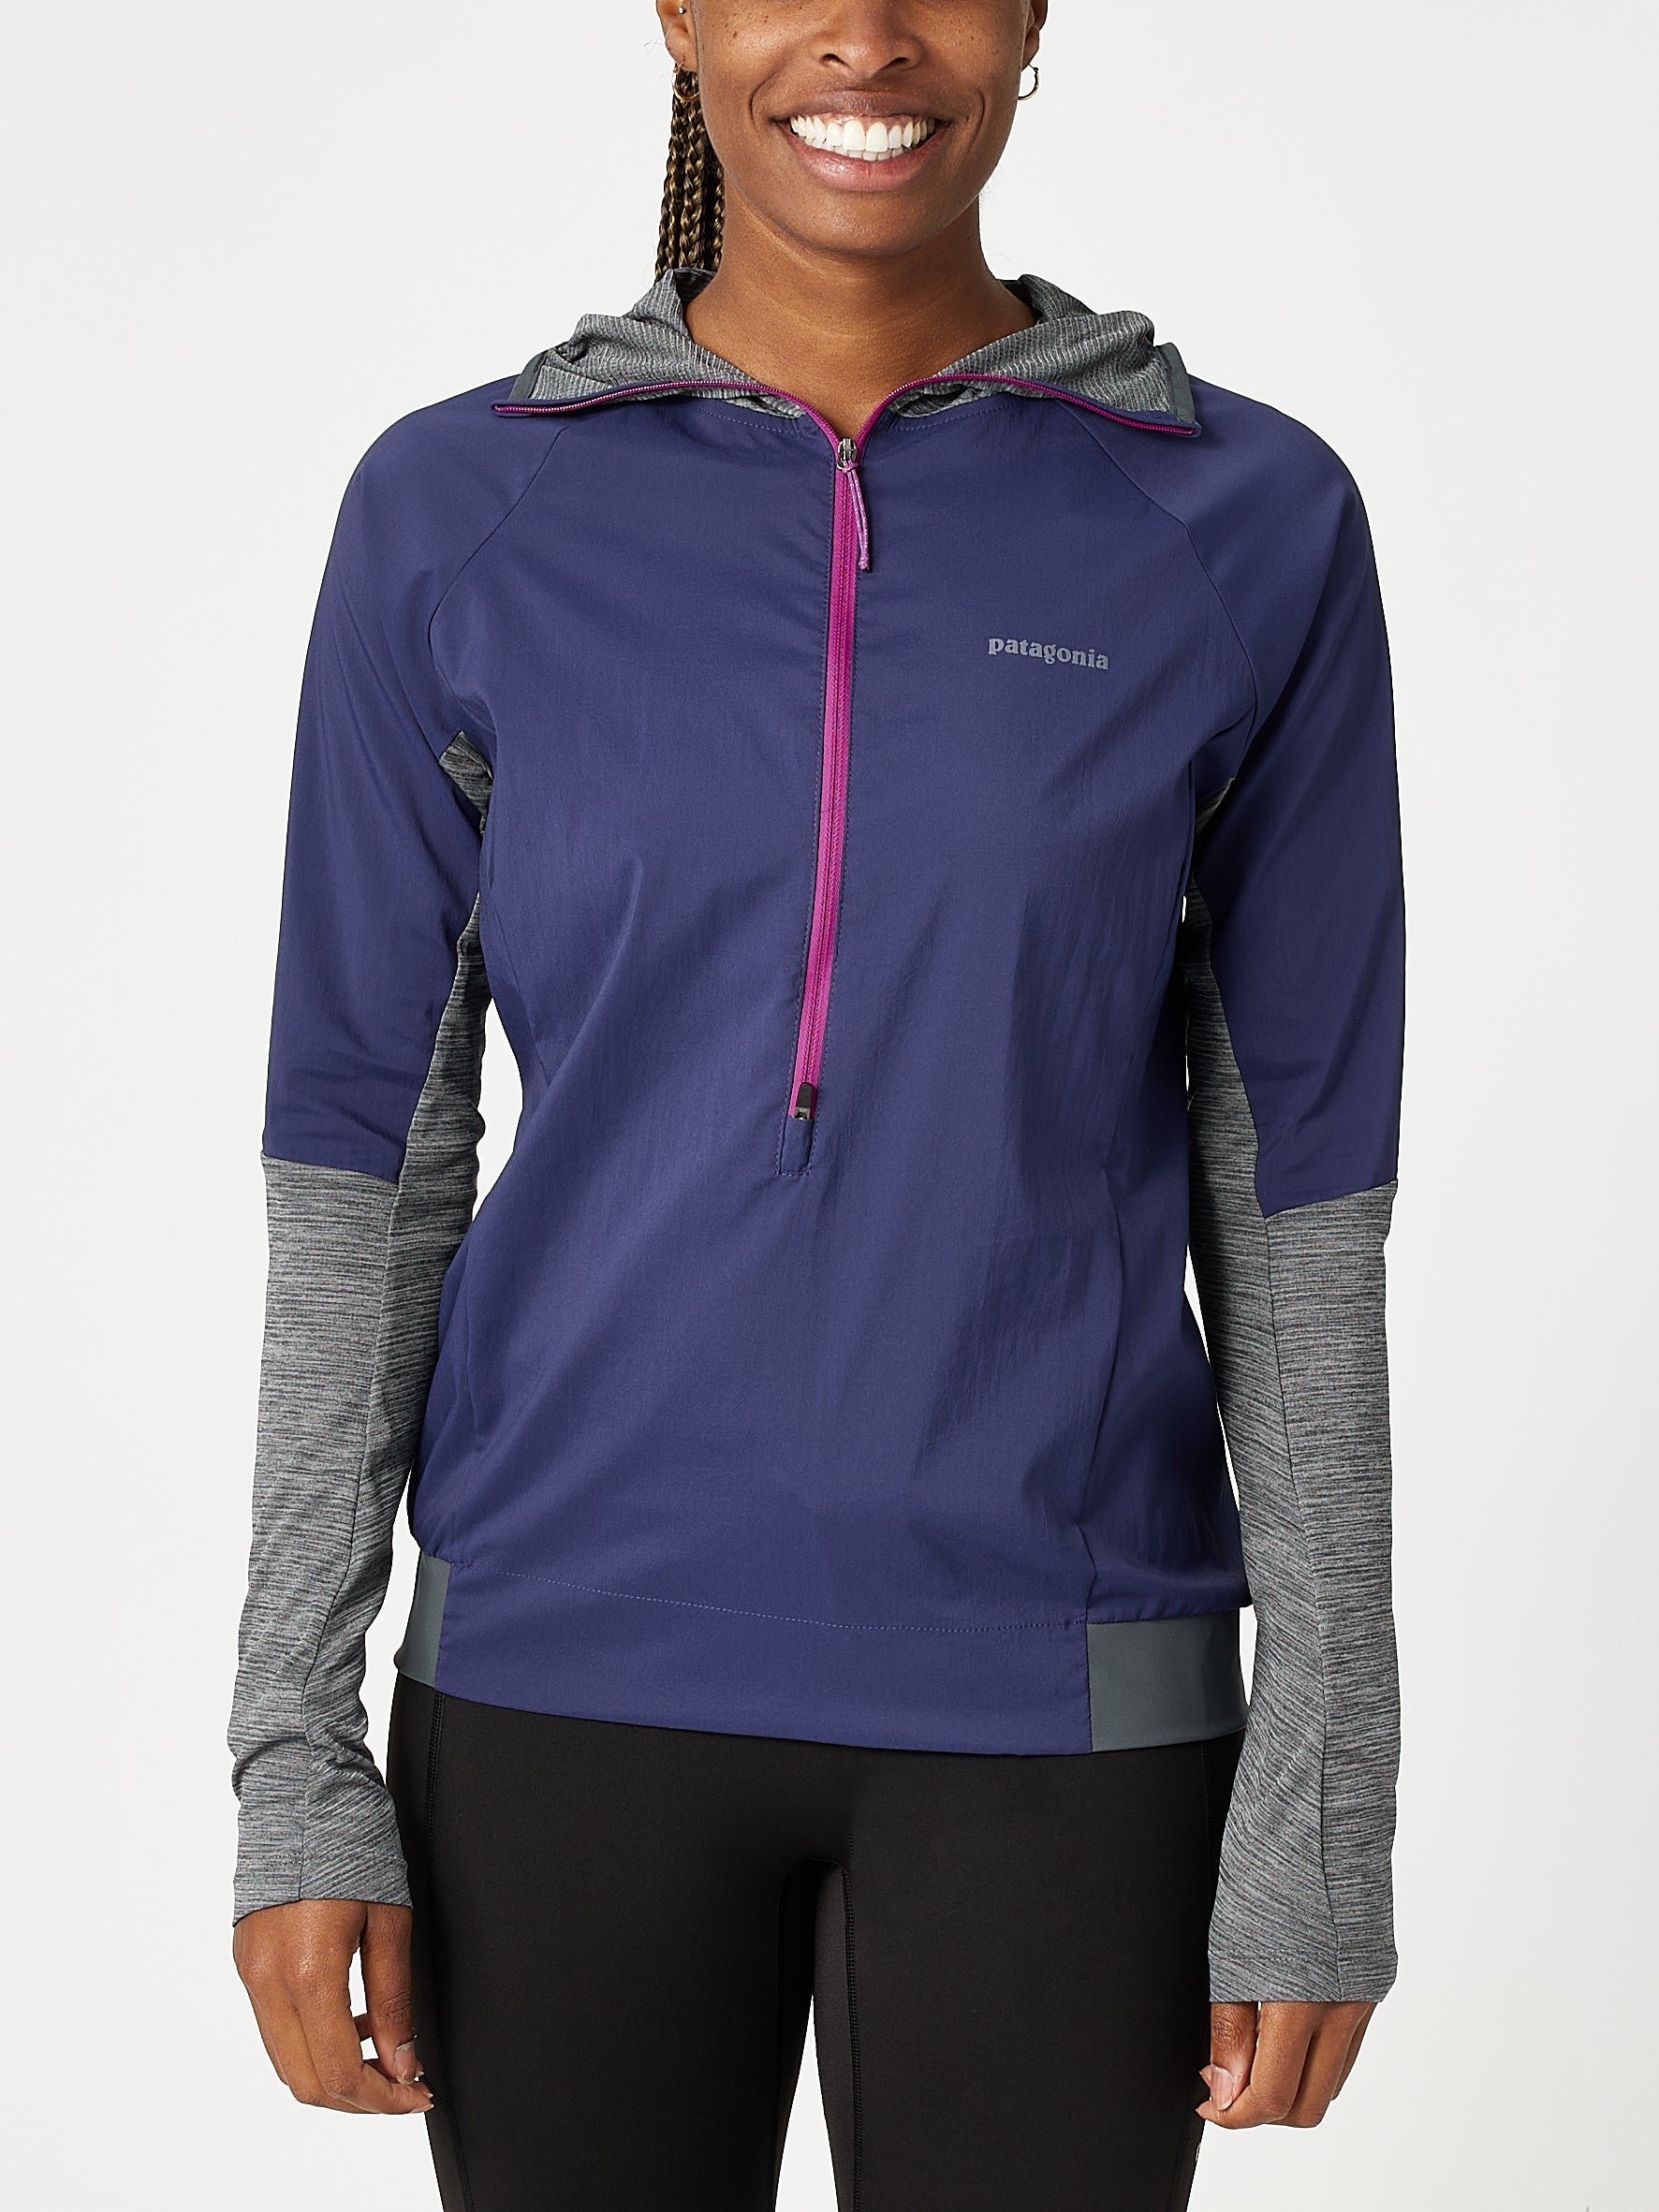 Ronhill Womens Stride Running Thermal Long Sleeve Top 